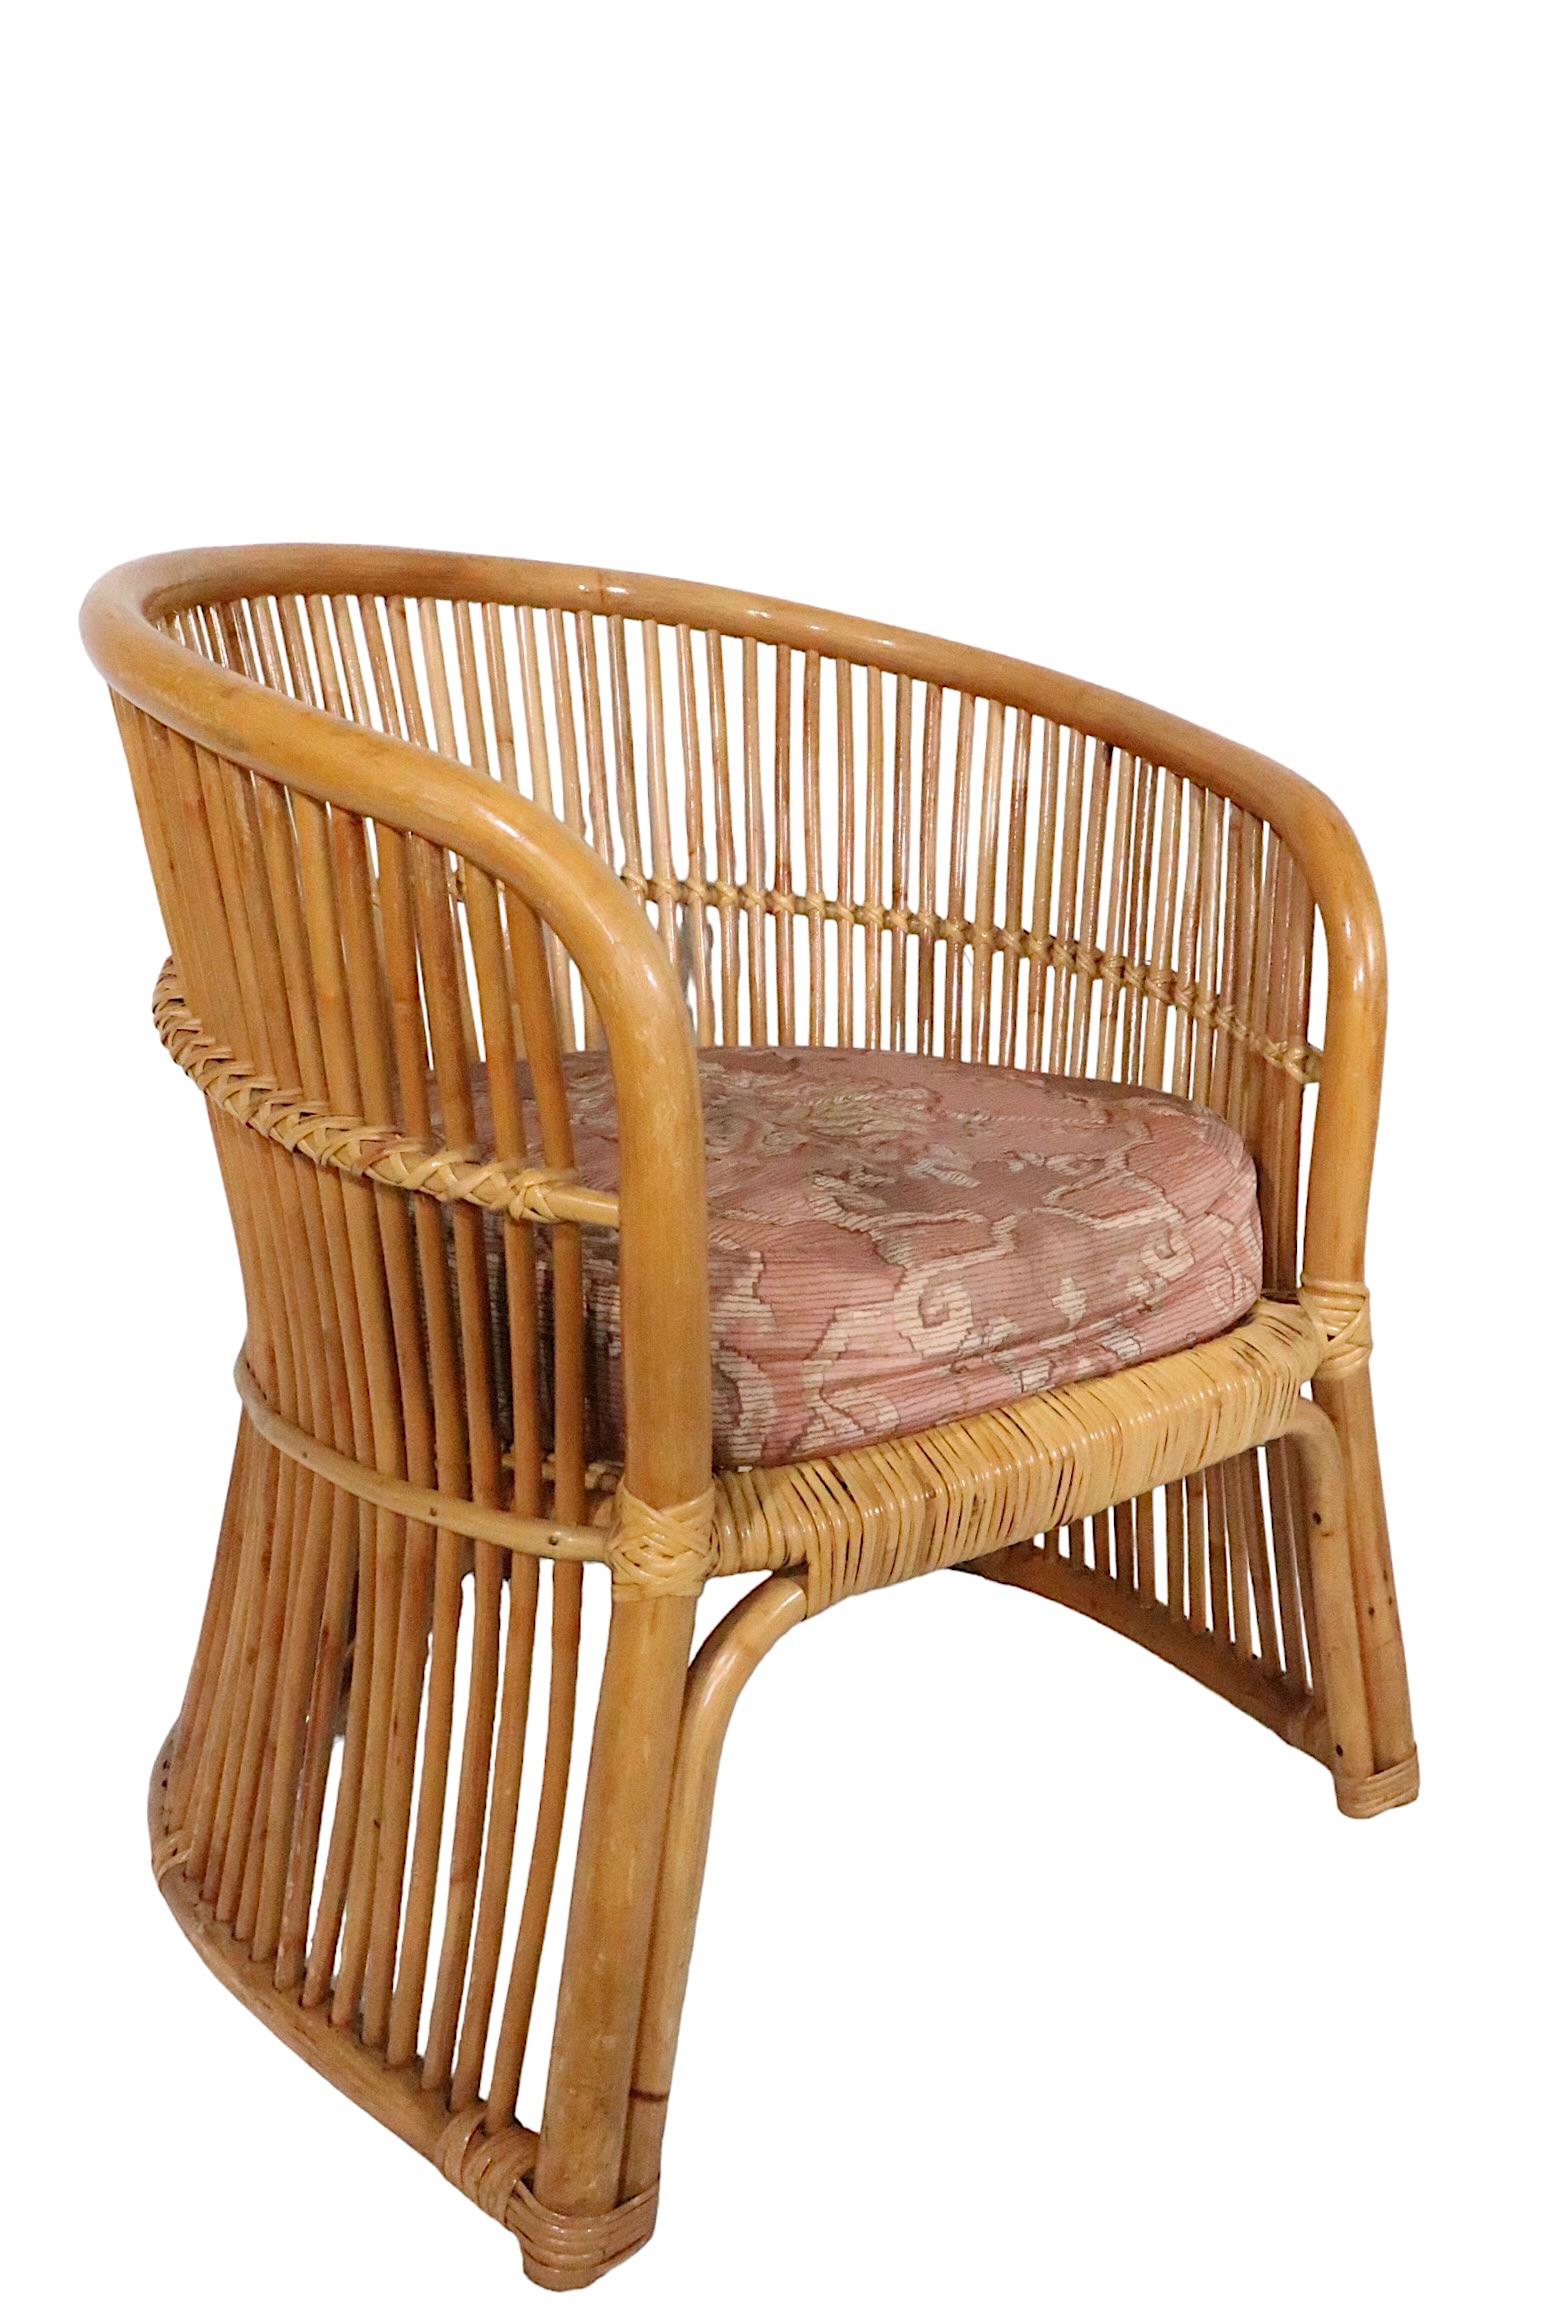 Chic, voguish, architectural arm chair, featuring a wrap around frame of vertical reeds, attached to a bamboo frame. This example comes with the seat and back rest cushion, both show wear, but are included. The chair was executed in the style of